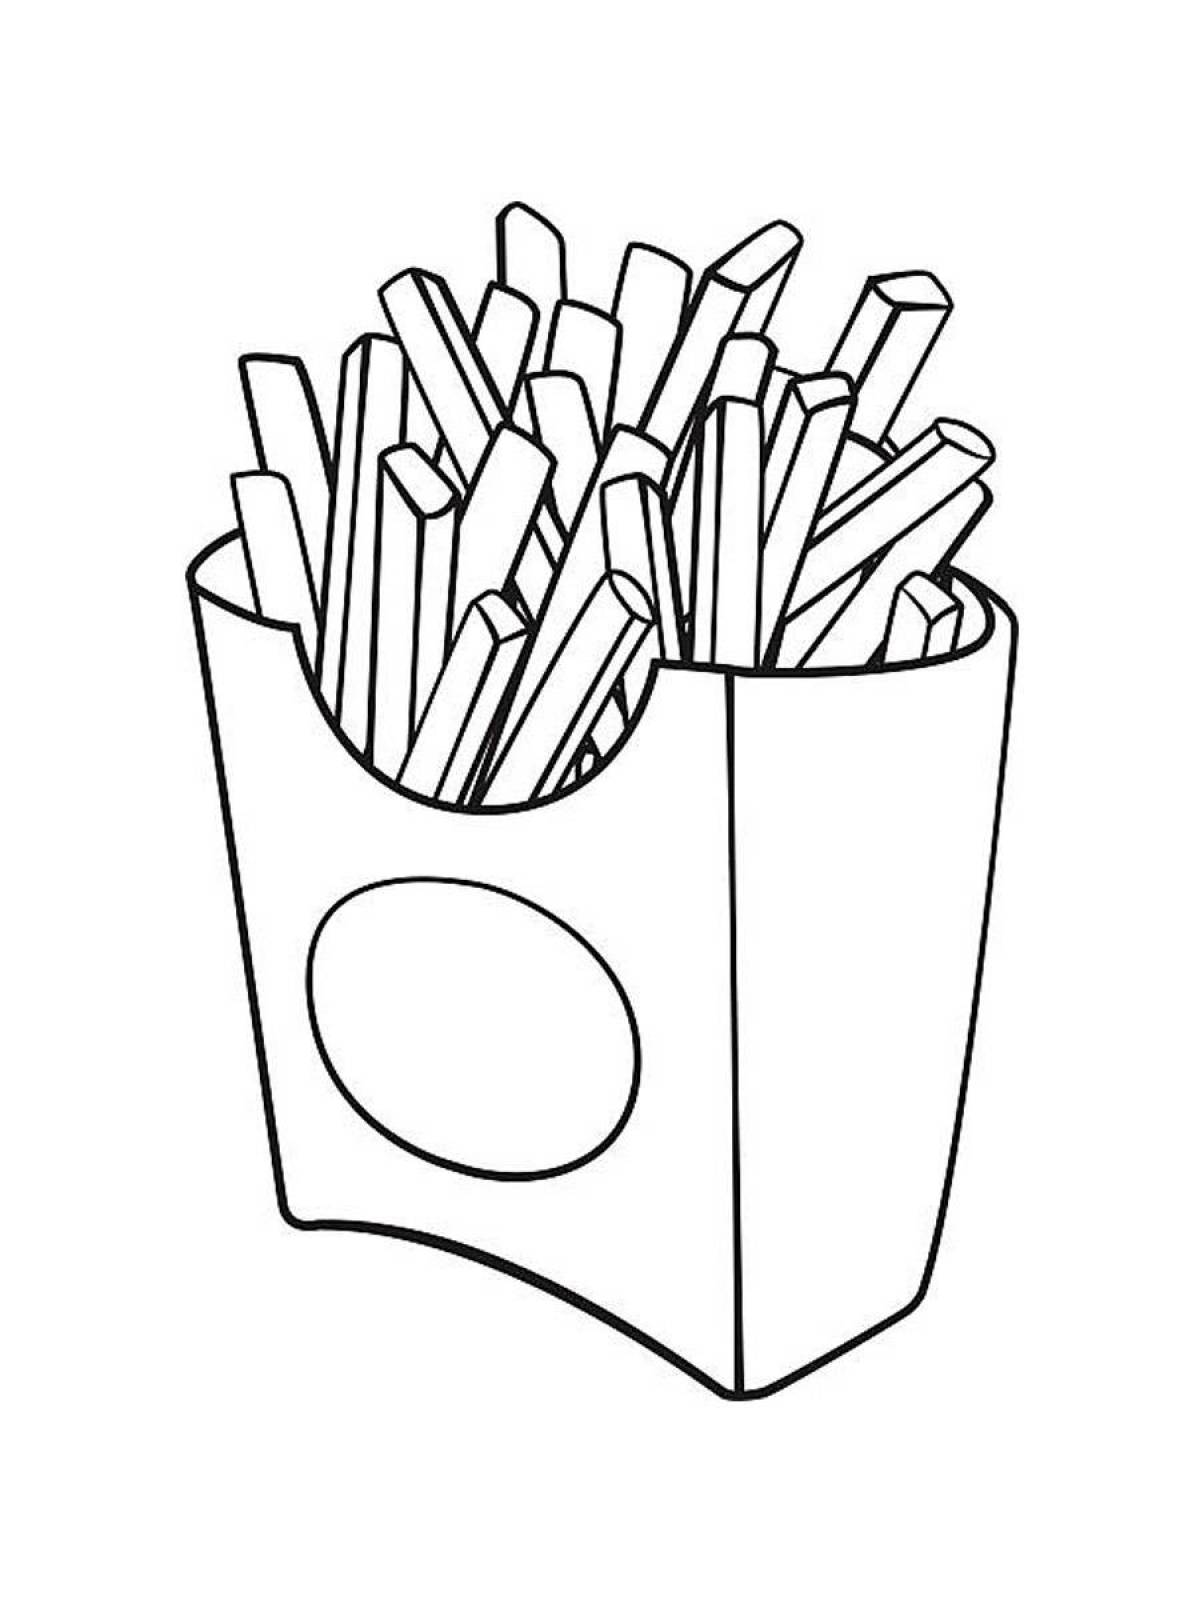 Appetizing french fries coloring book